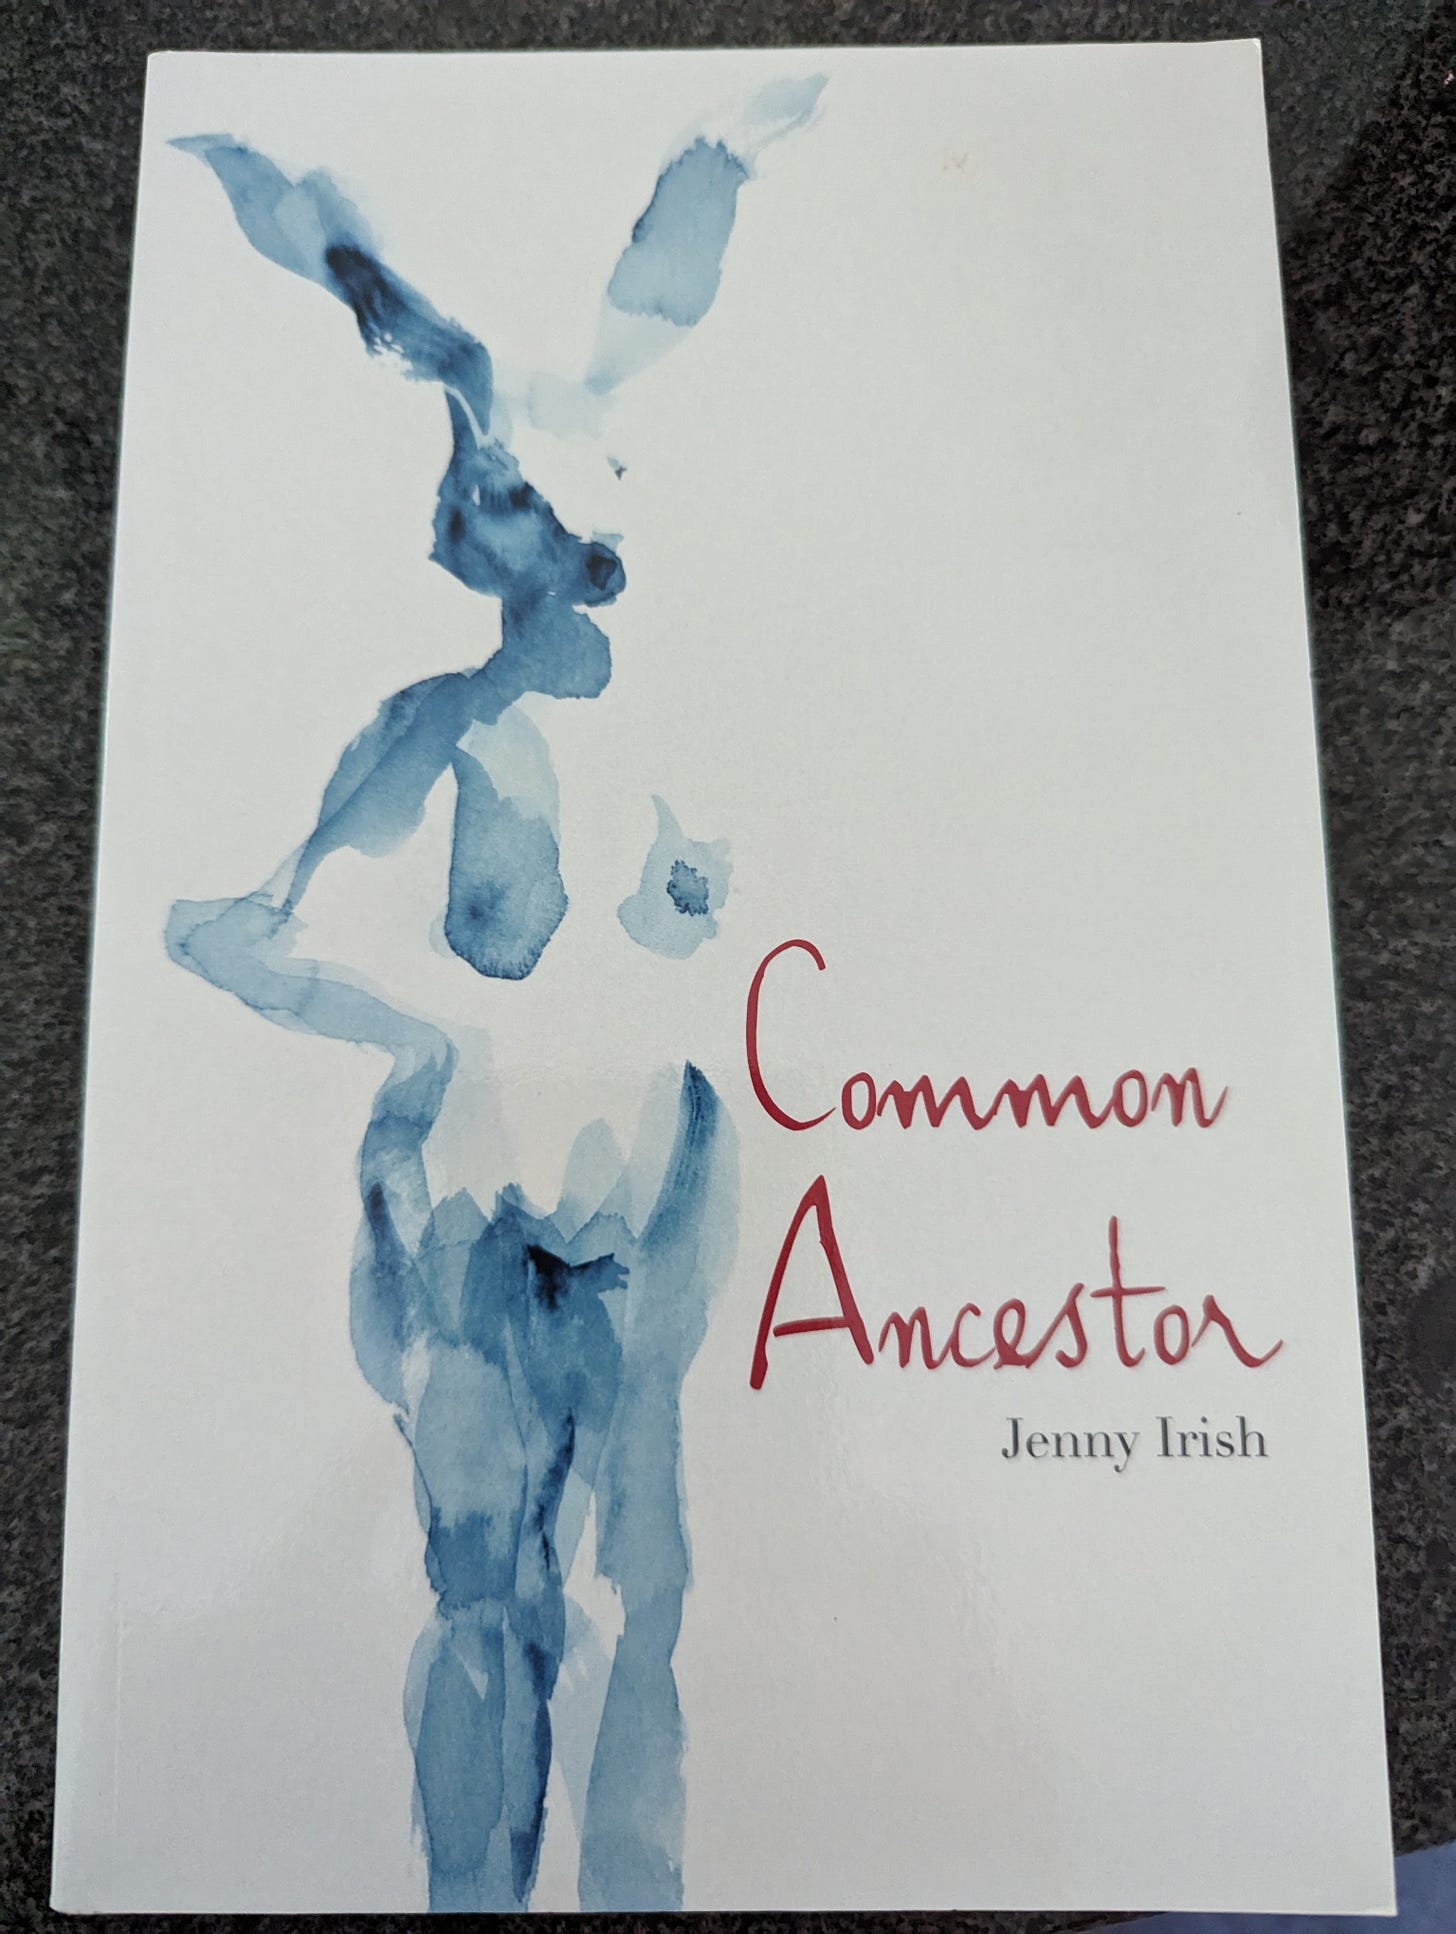 White cover with a painting of a blue rabbit woman with bare breasts - title Common Ancestor in red script